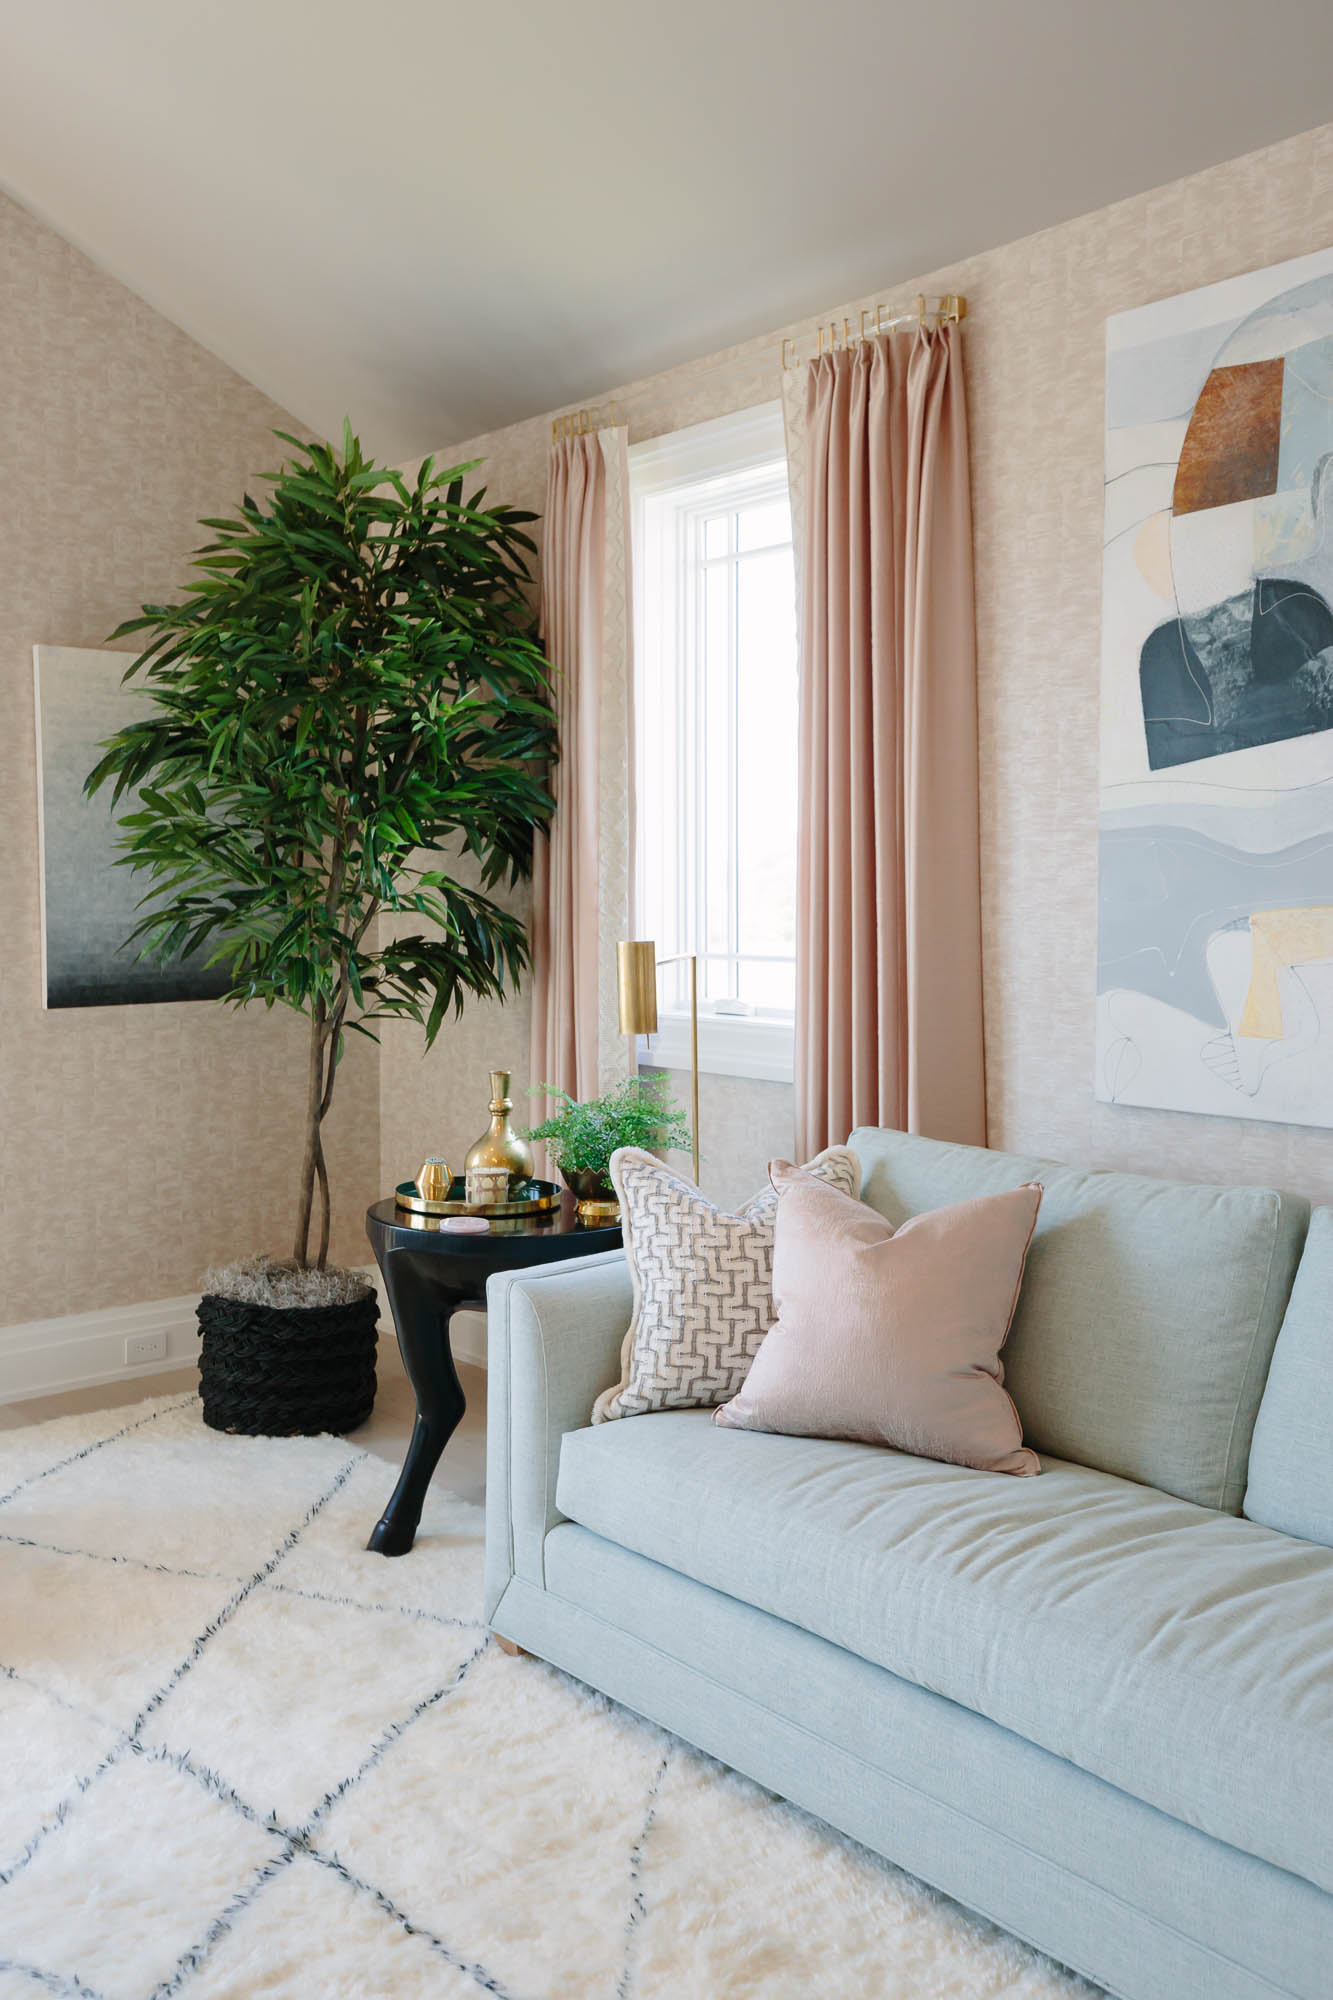 2019 Hampton Designer Showhouse featured by top US style blog, York Avenue: image of Morgan Harrison Home bedroom at the 2019 Hampton Designer Showhouse